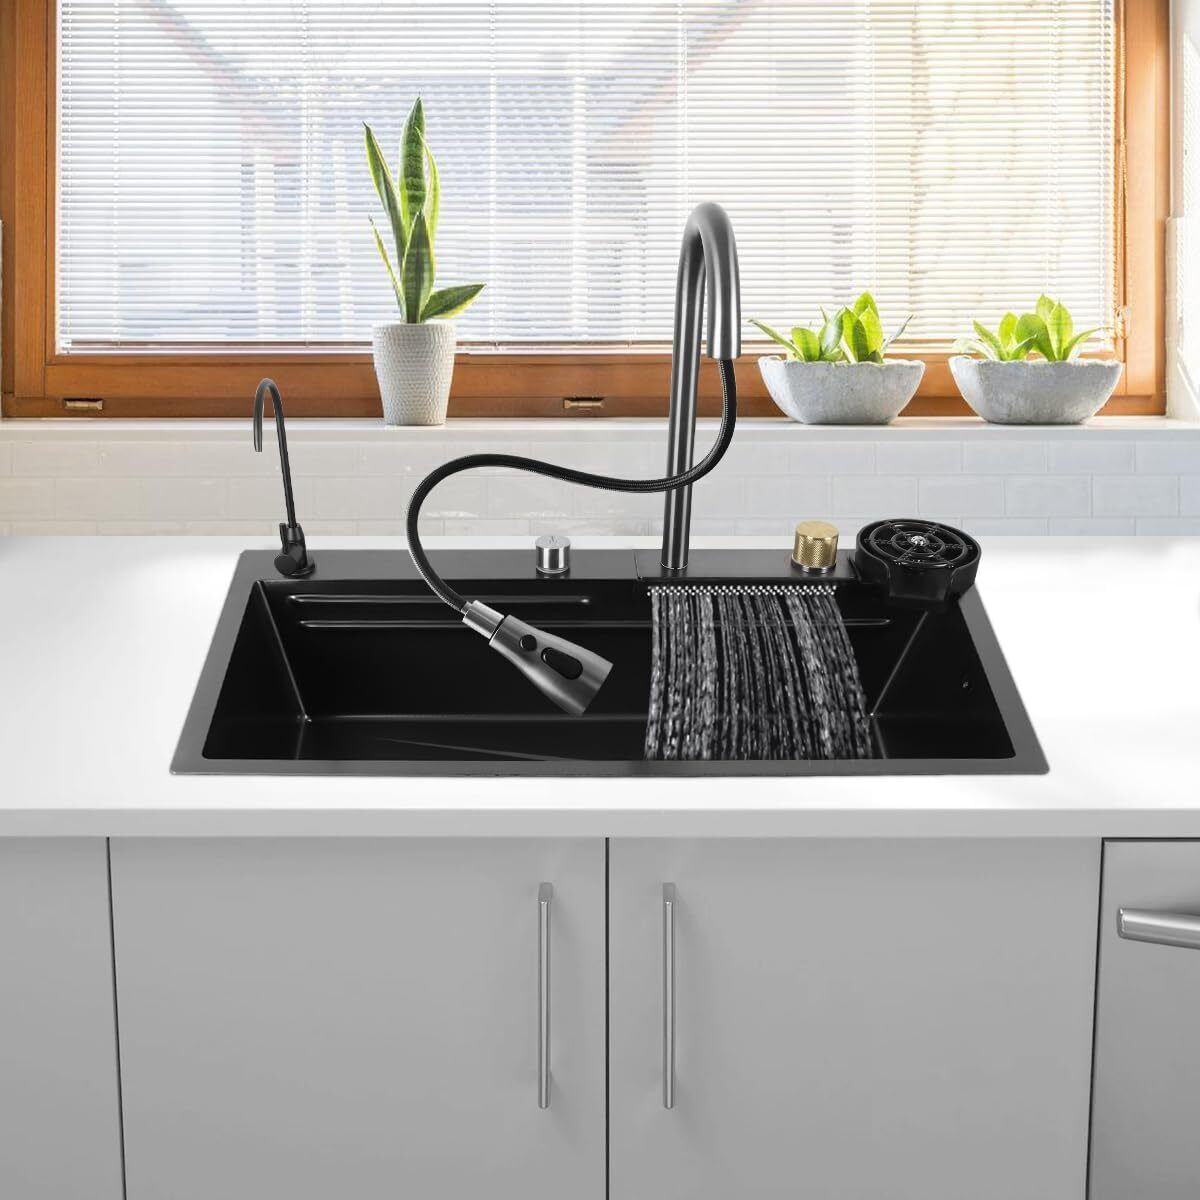 High-tech kitchen sink with waterfall effect and digital display